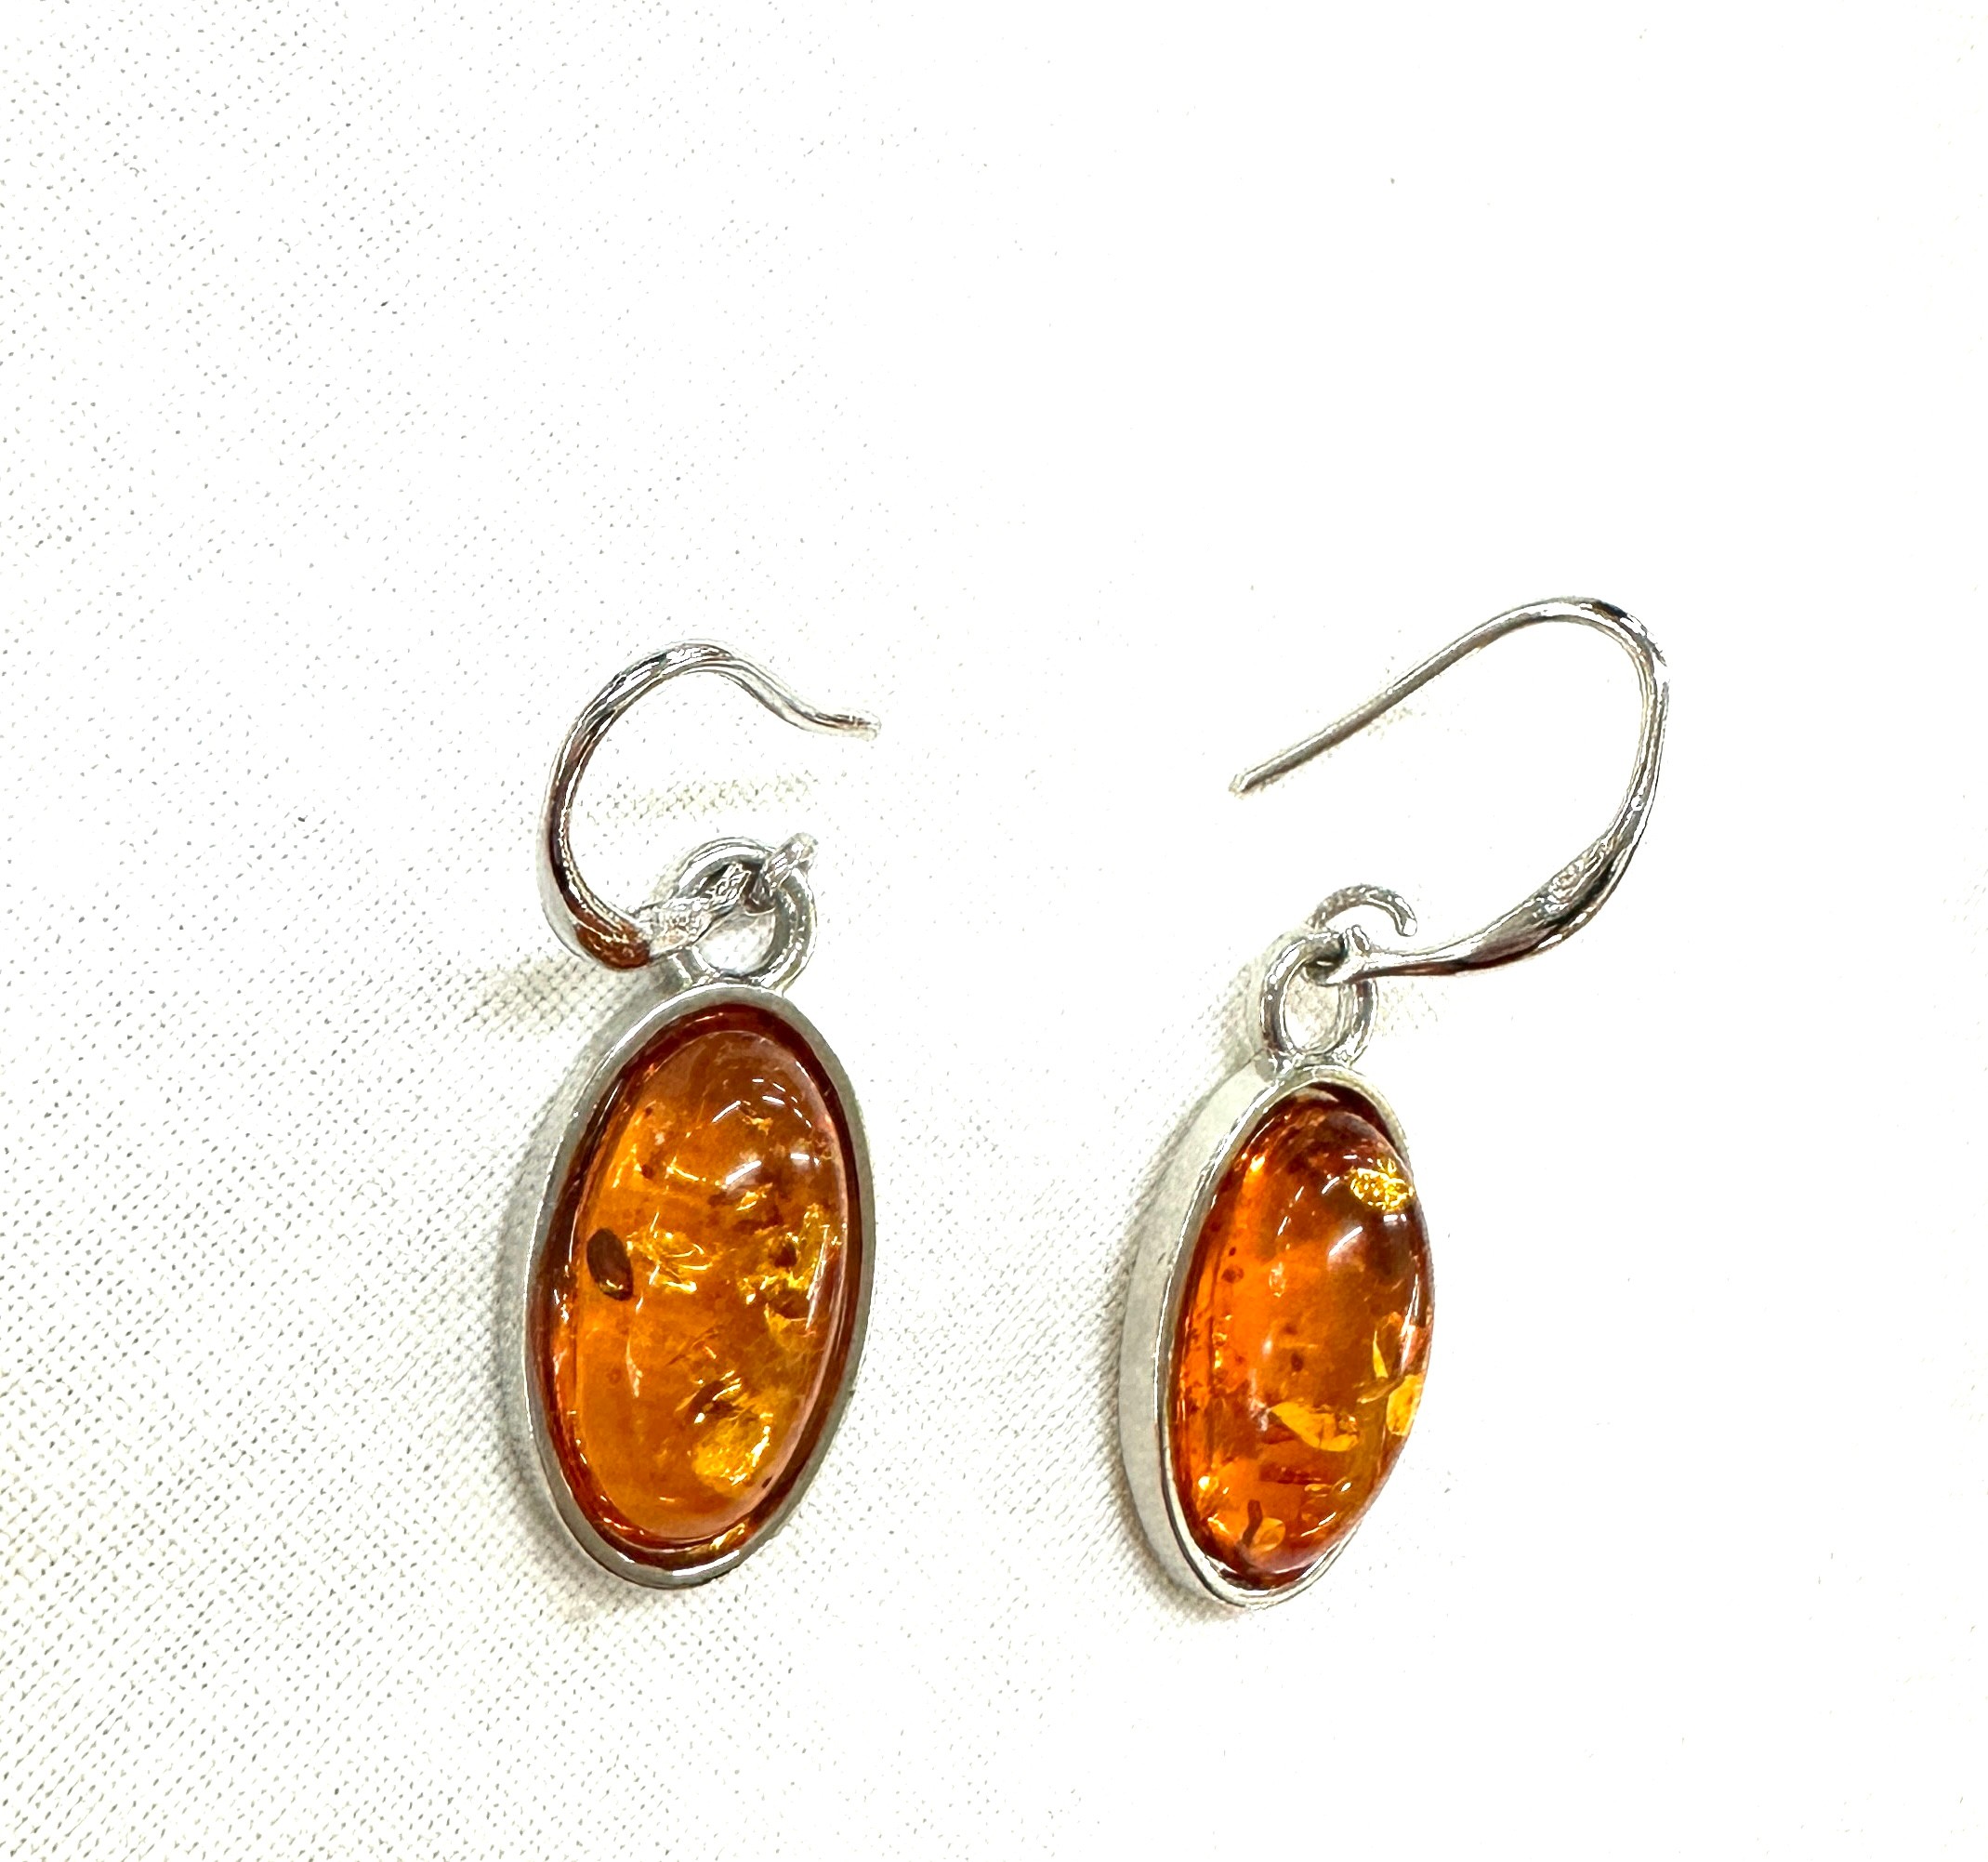 Amber resin necklace and 925 earrings - Image 3 of 4